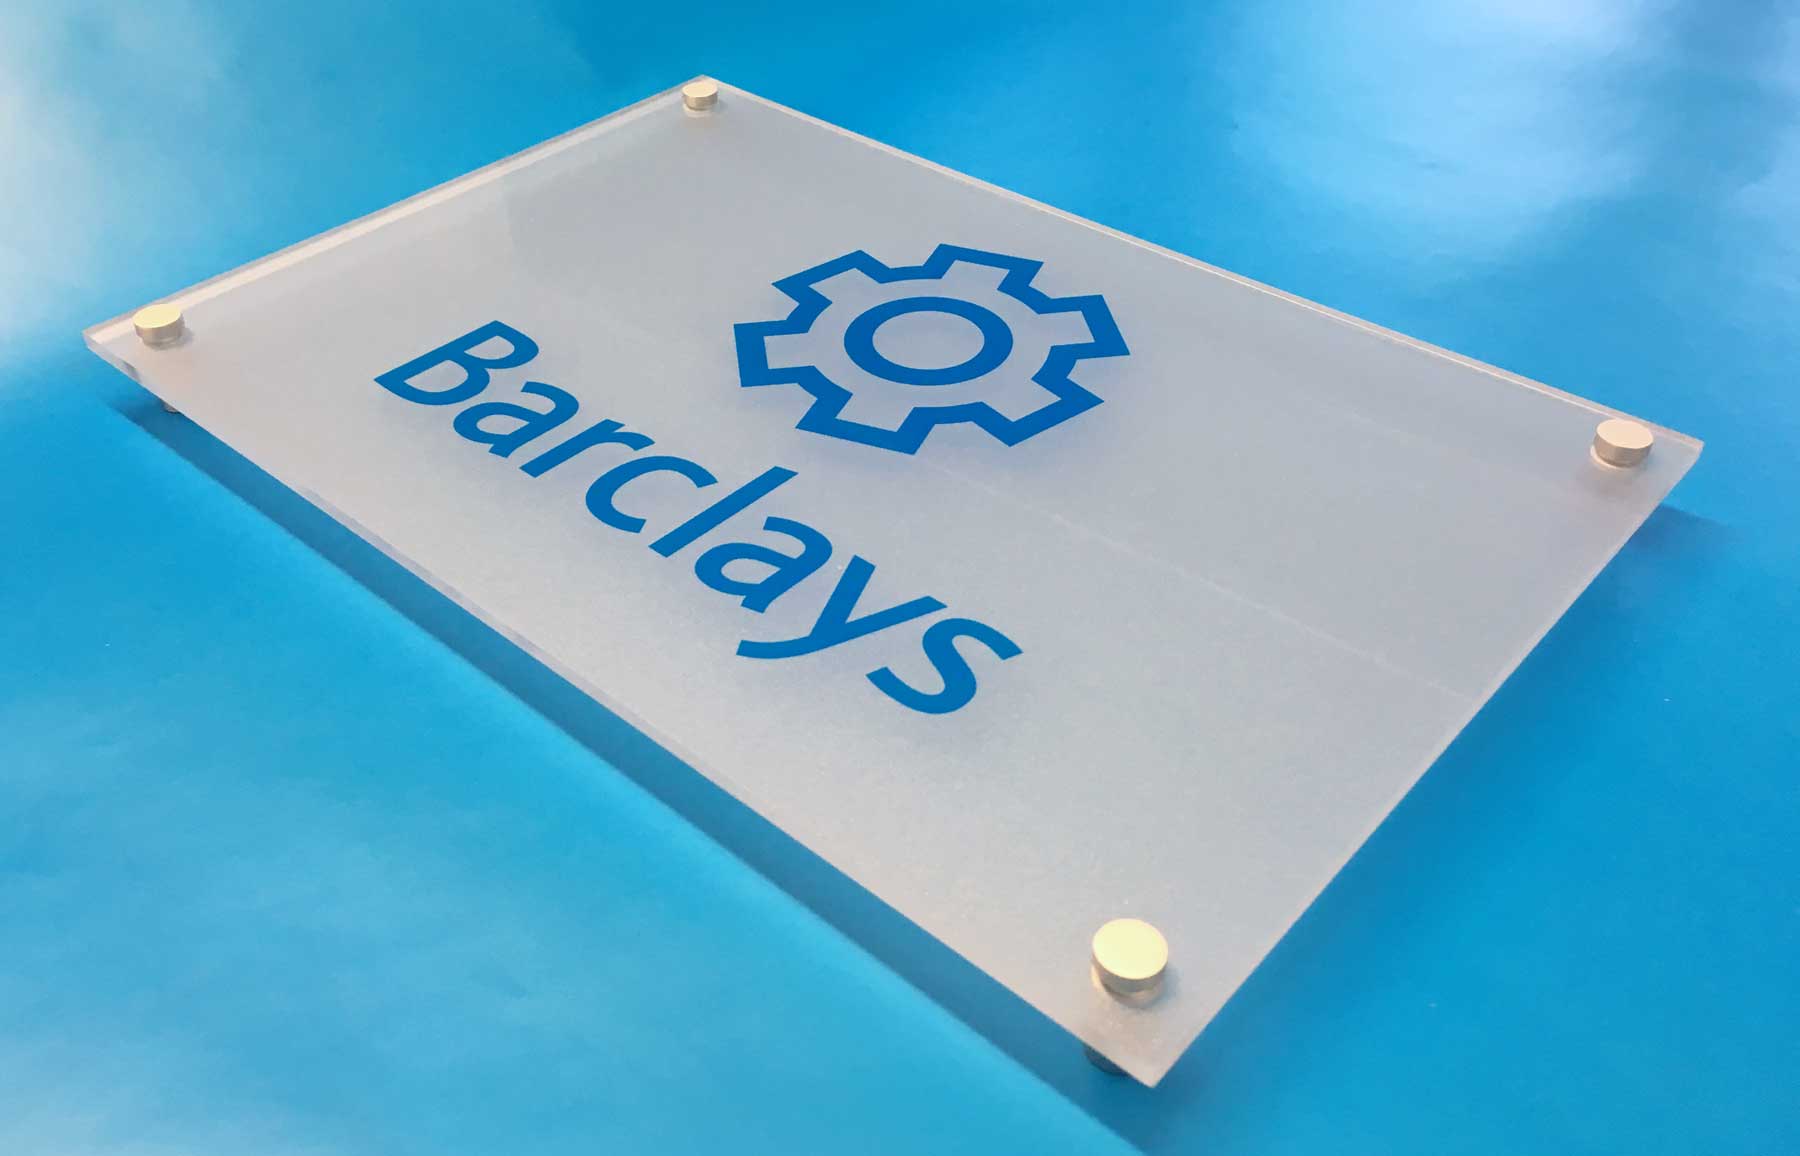 Barclays acrylic sign frosted